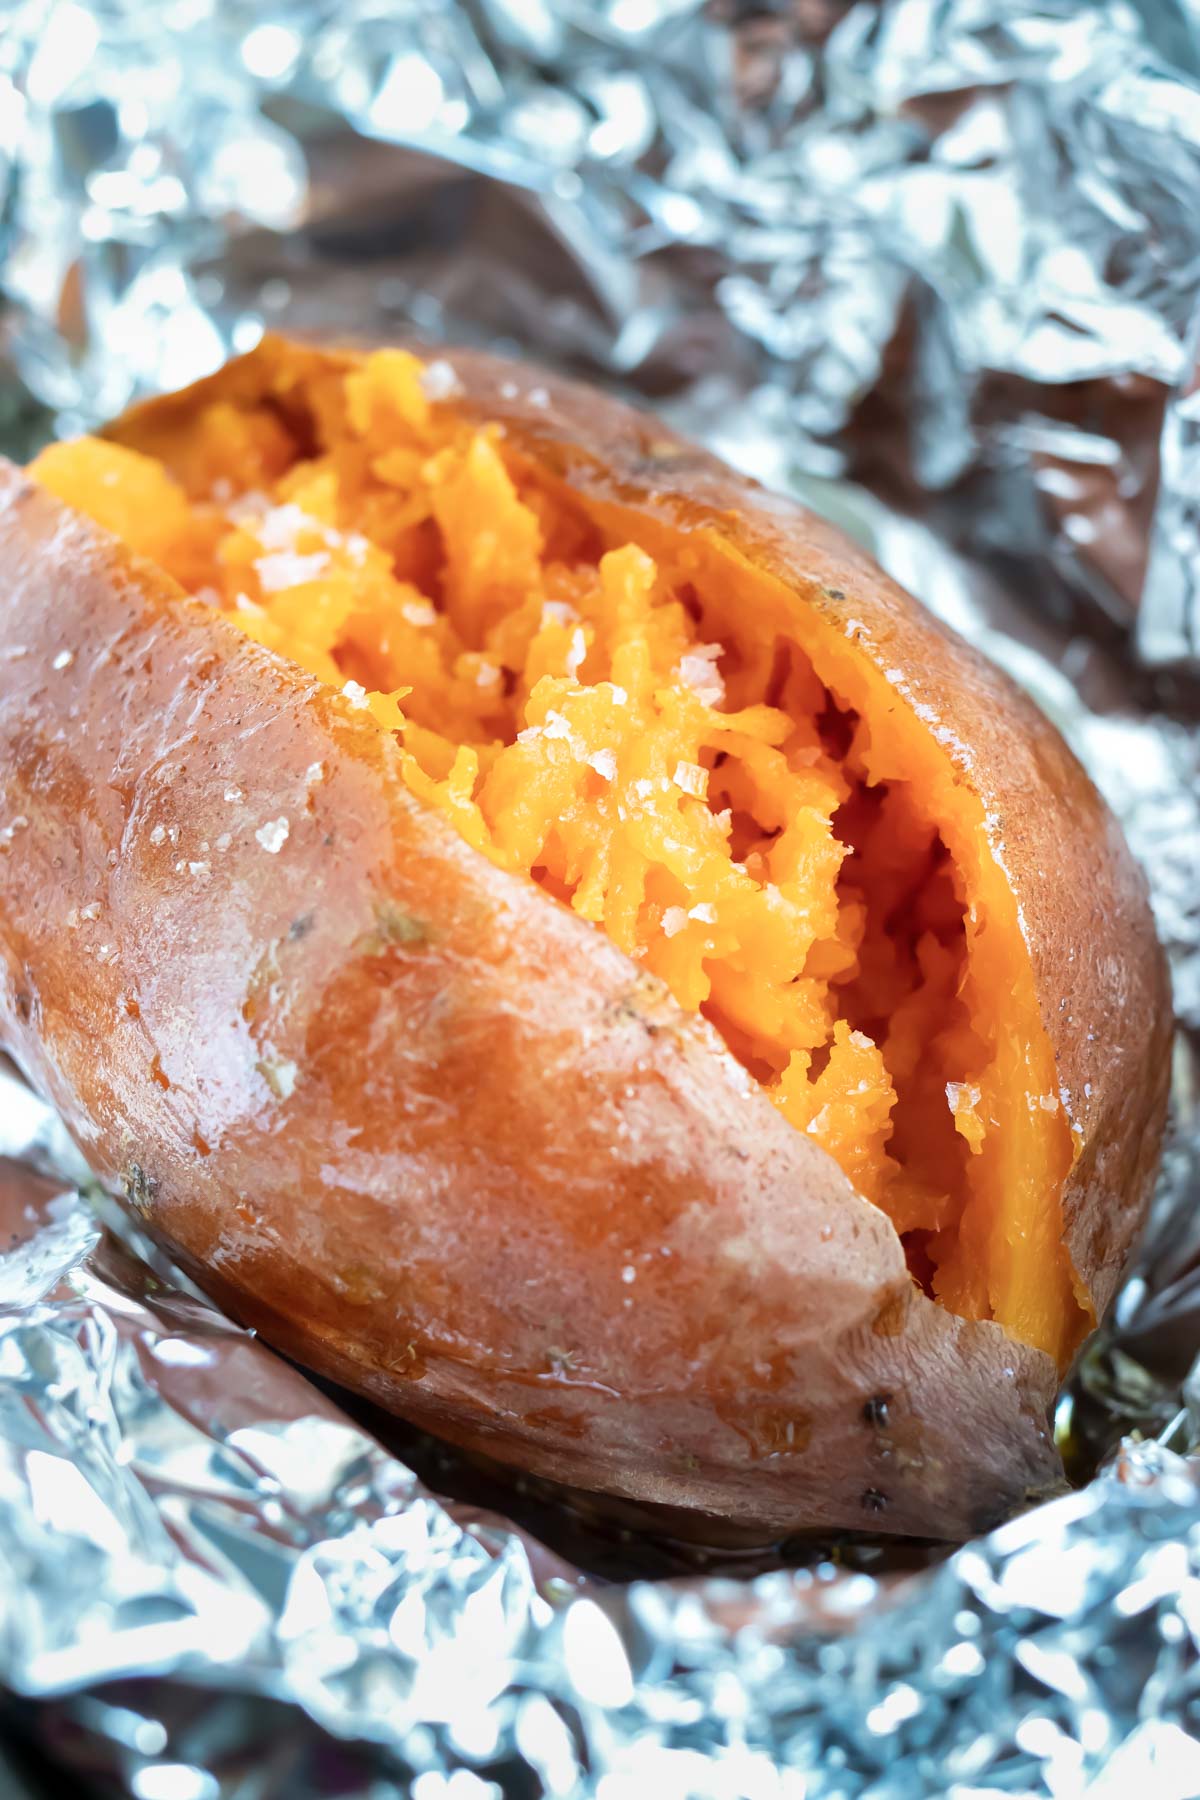 It takes 2 large sweet potatoes, 3 medium-sized, and 4 small potatoes to make up a pound.